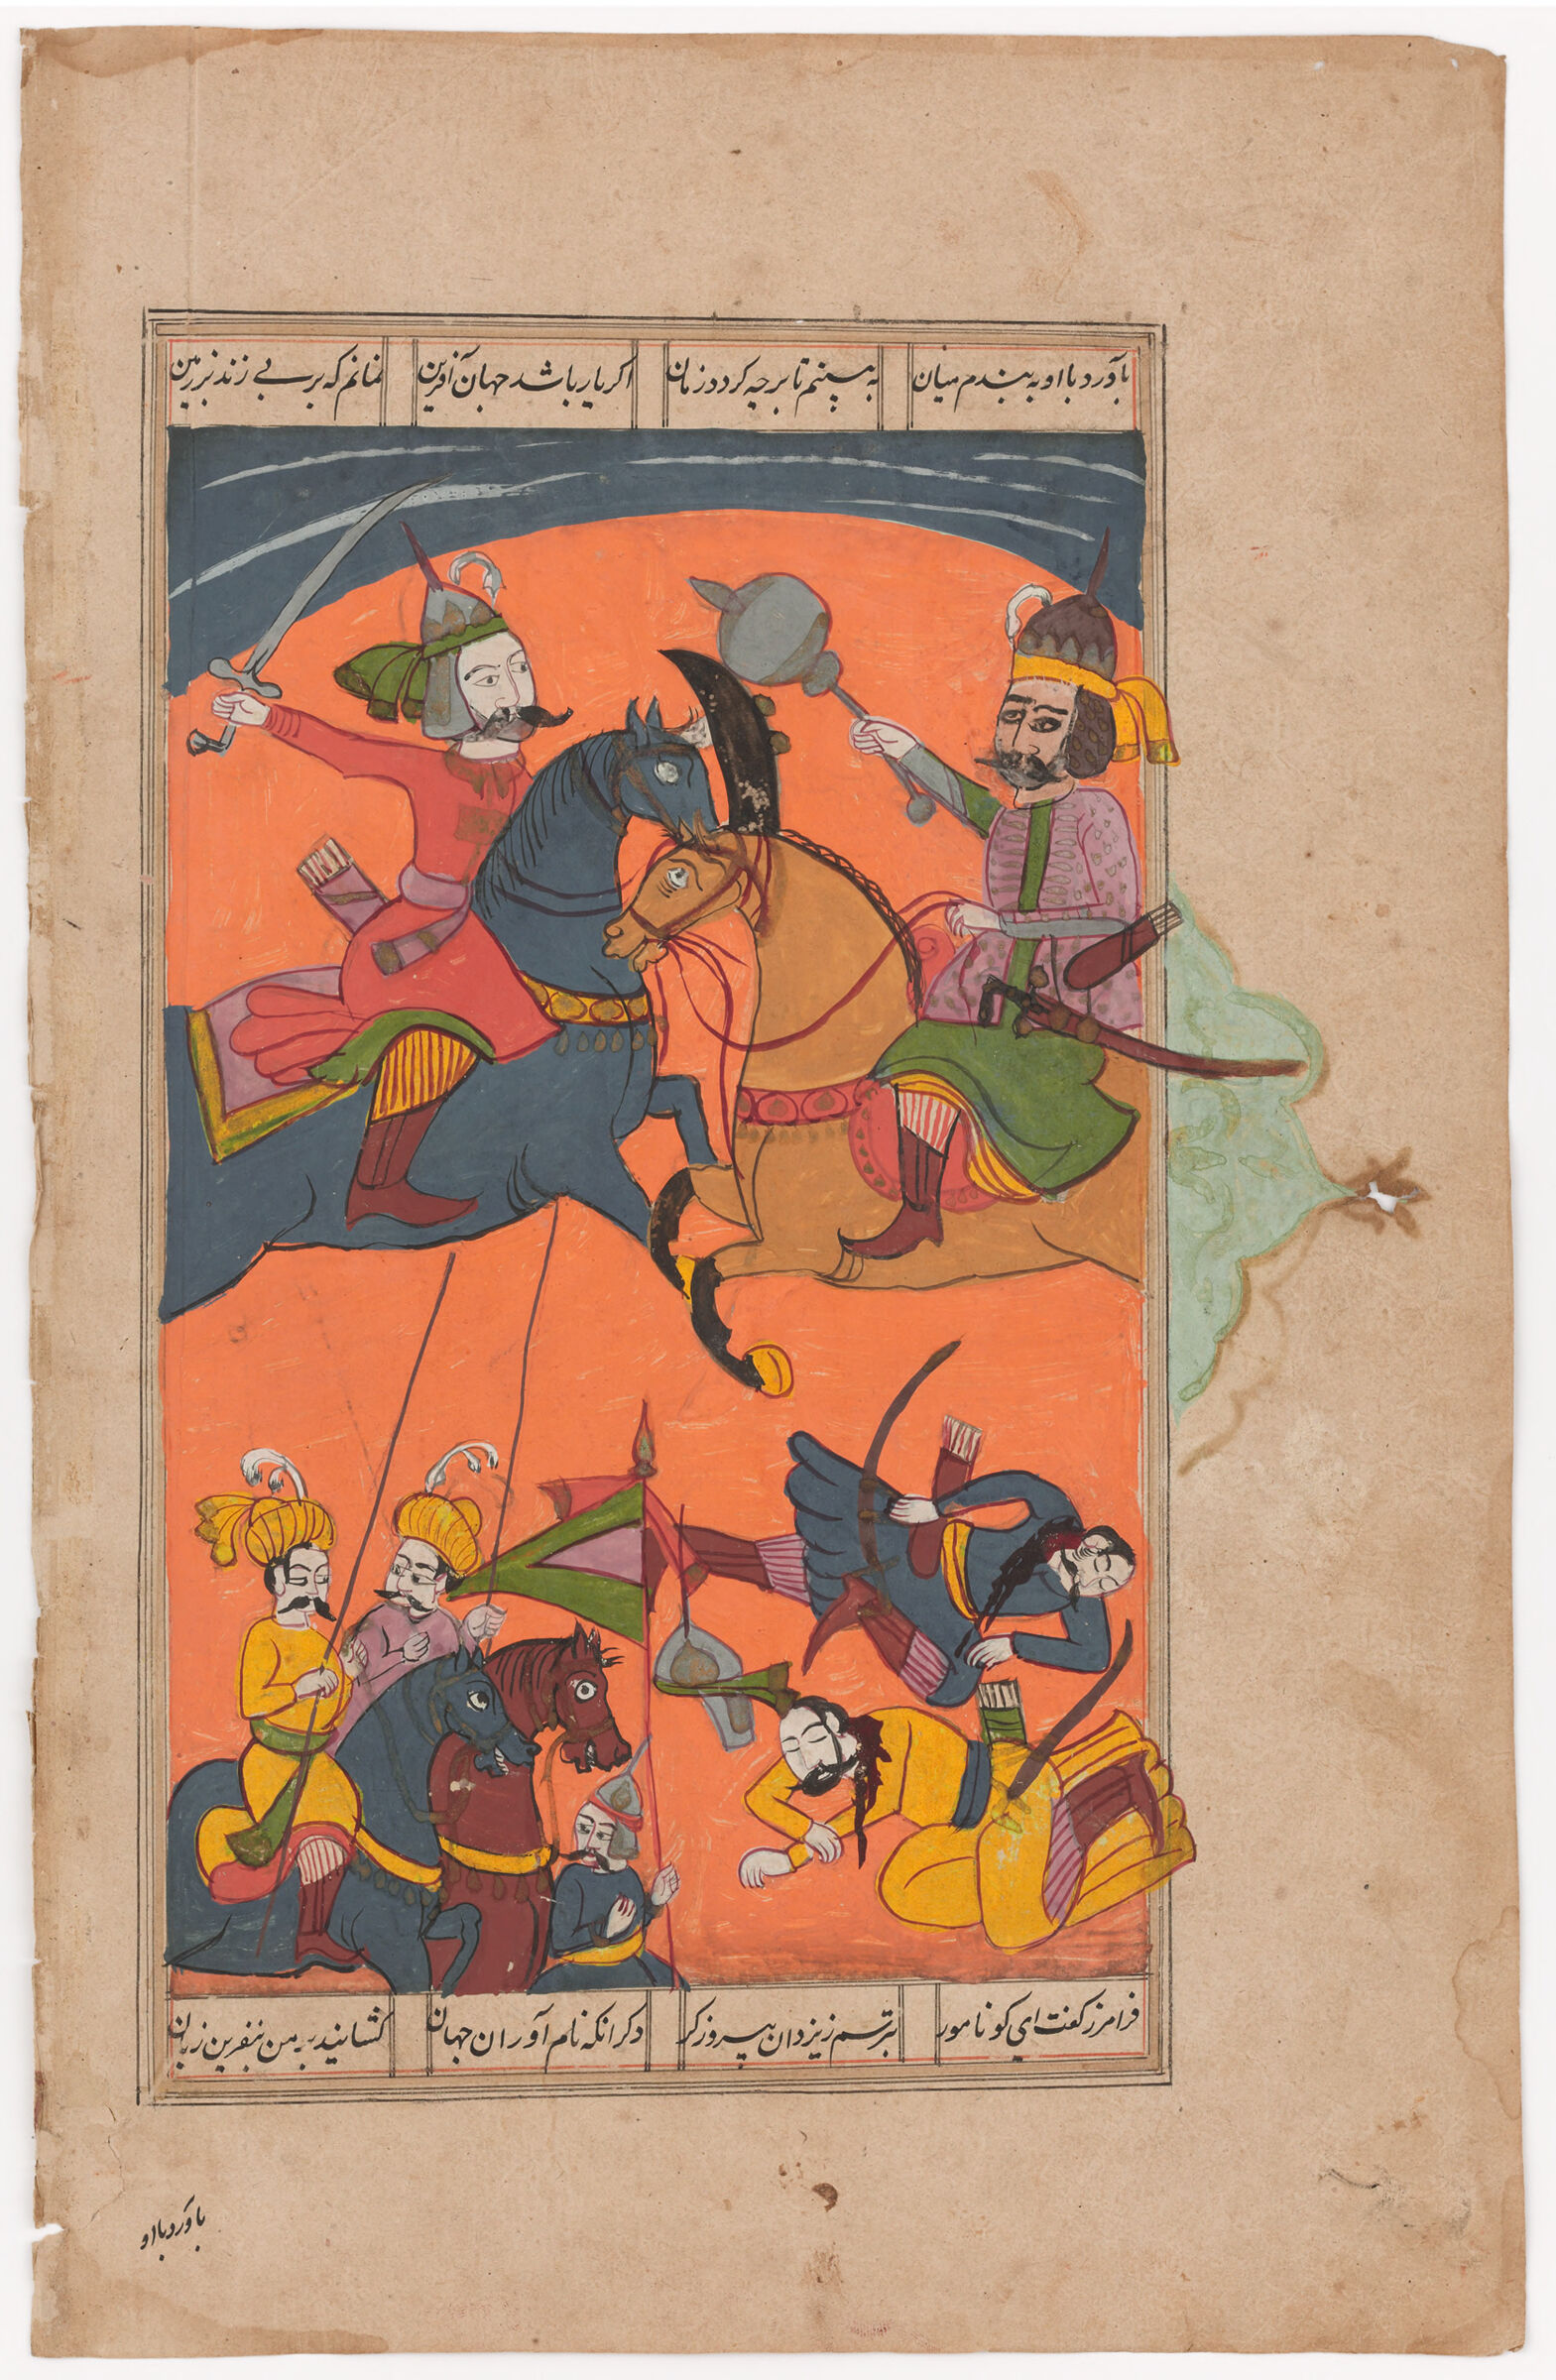 Faramurz Battles Pilsam (Text Recto; Painting Verso Of Folio 271), Illustrated Folio From A Manuscript Of The Shahnama By Firdawsi